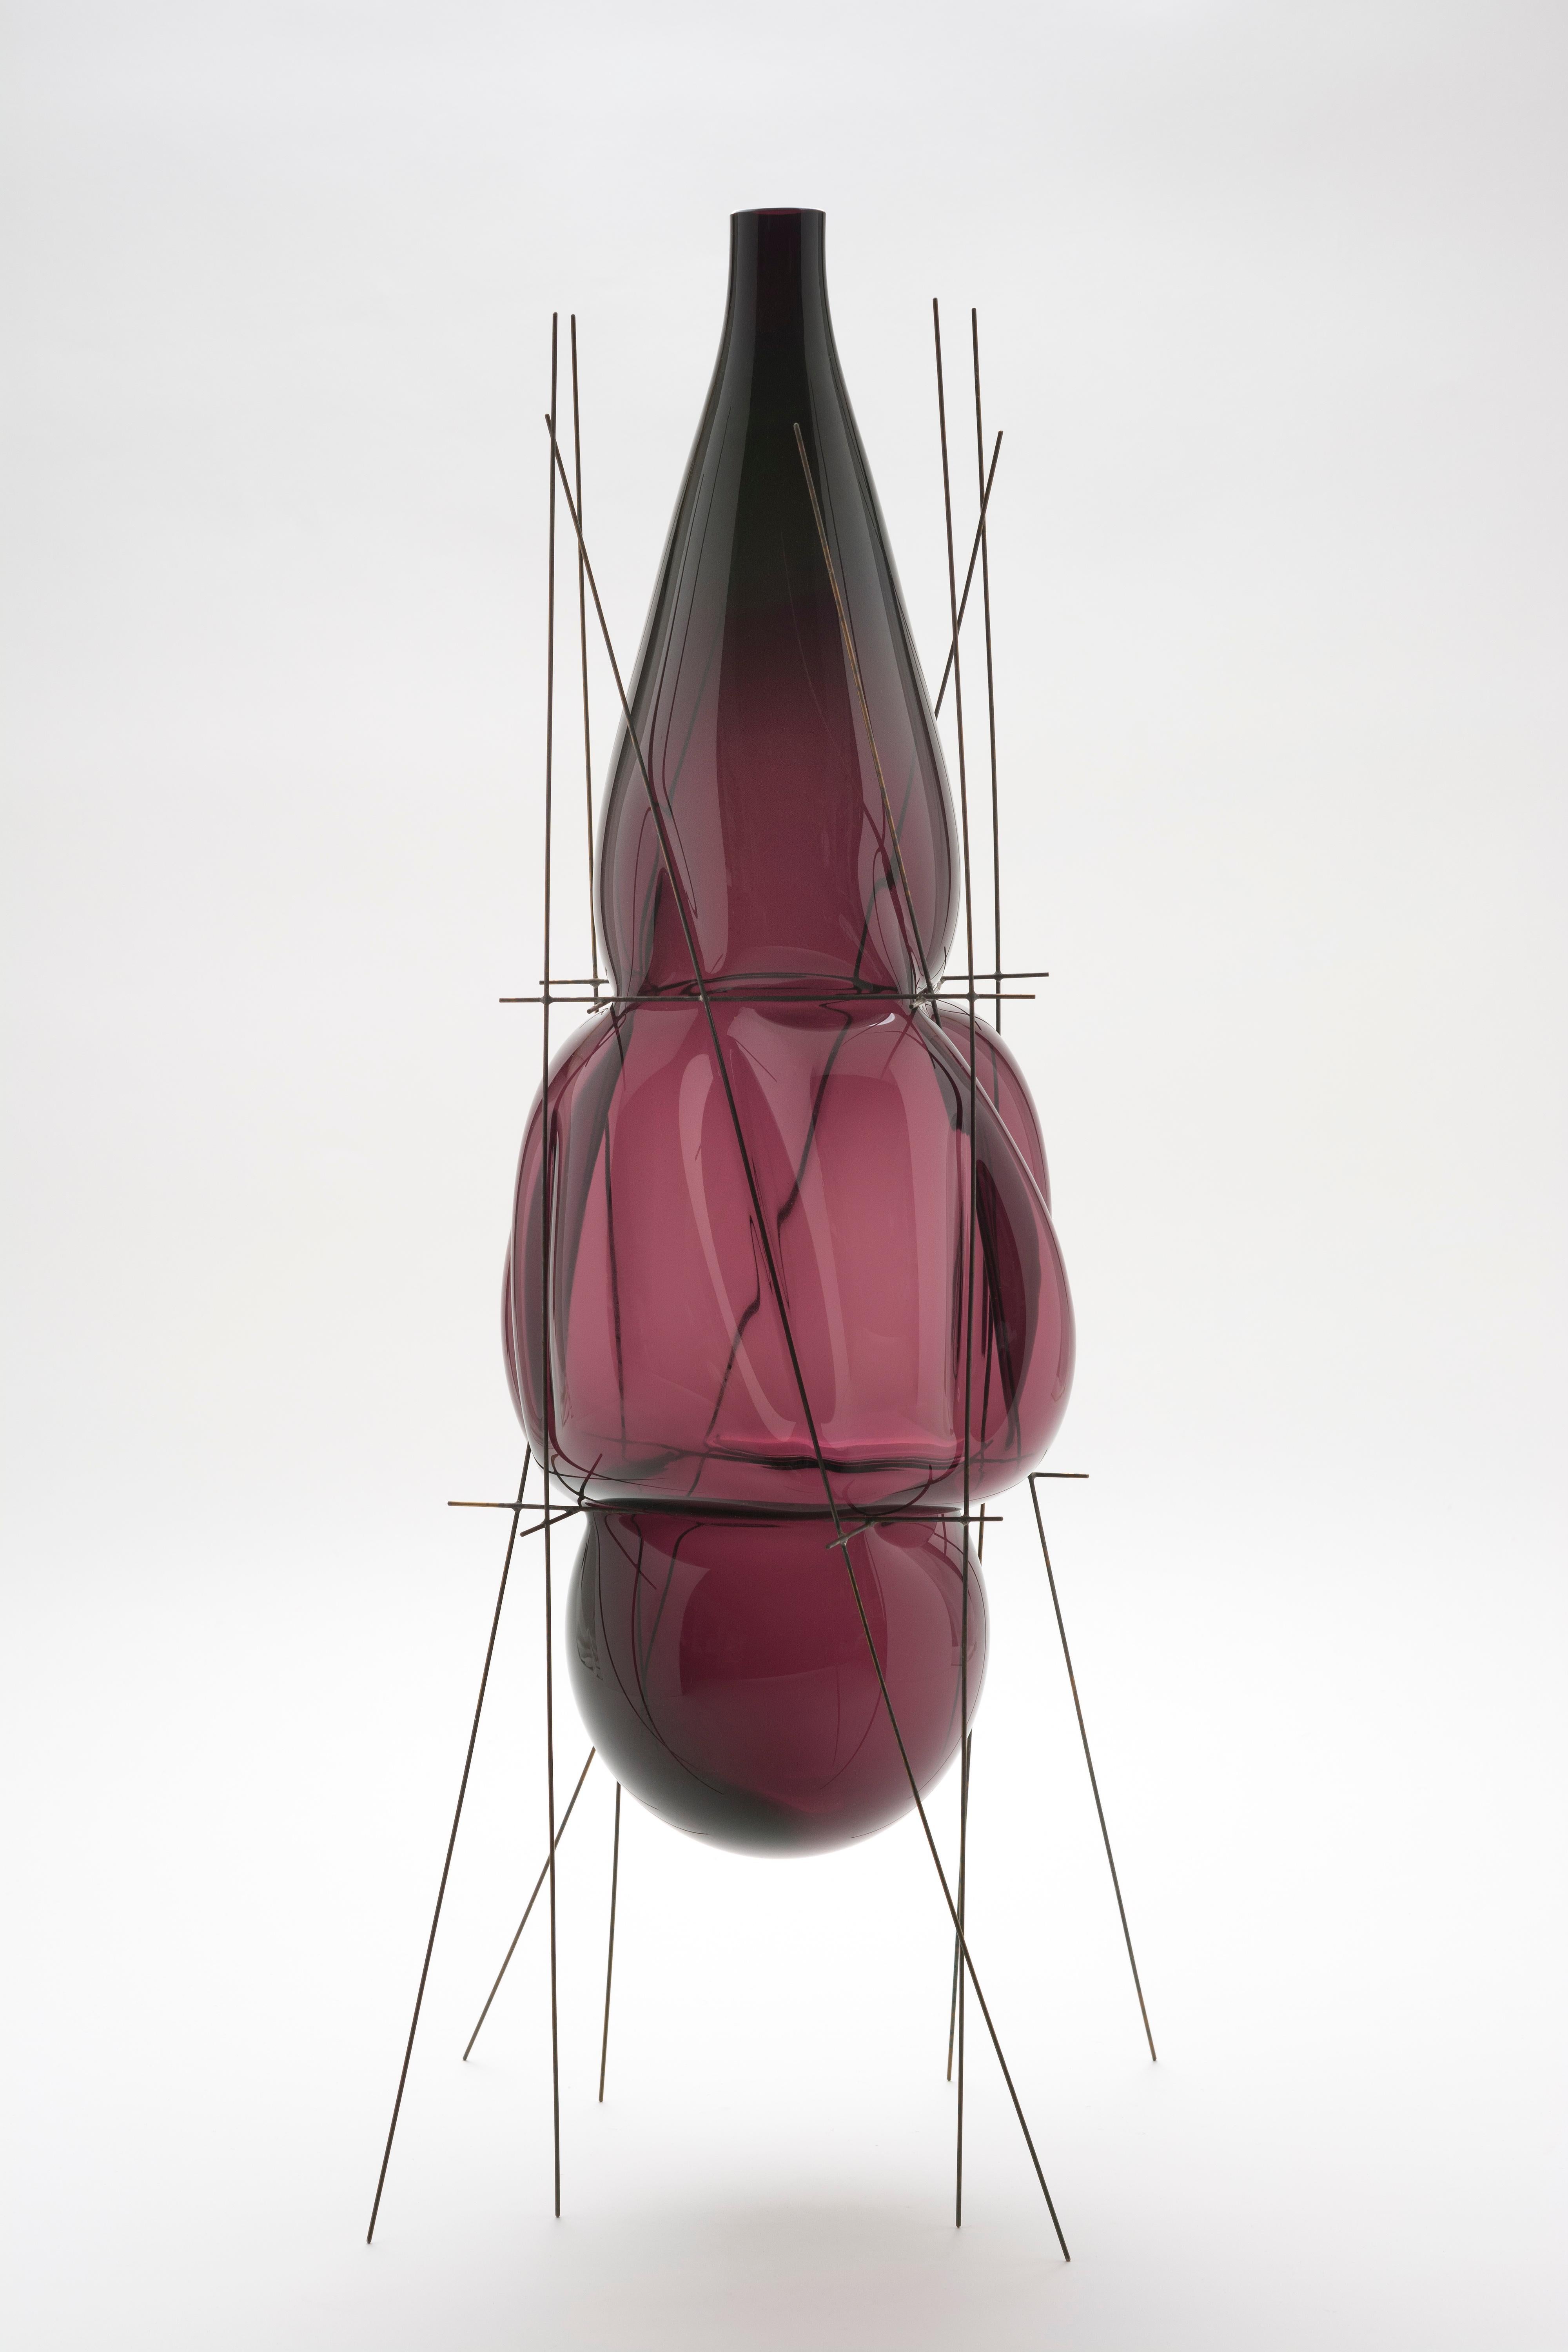 Staddle vase by Paolo Marcolongo
Dimensions: 24 x 24 x H 63 cm 
Materials: Murano glass and iron. 


Paolo Marcolongo was born in Padua in 1956, he attended the Art High School 